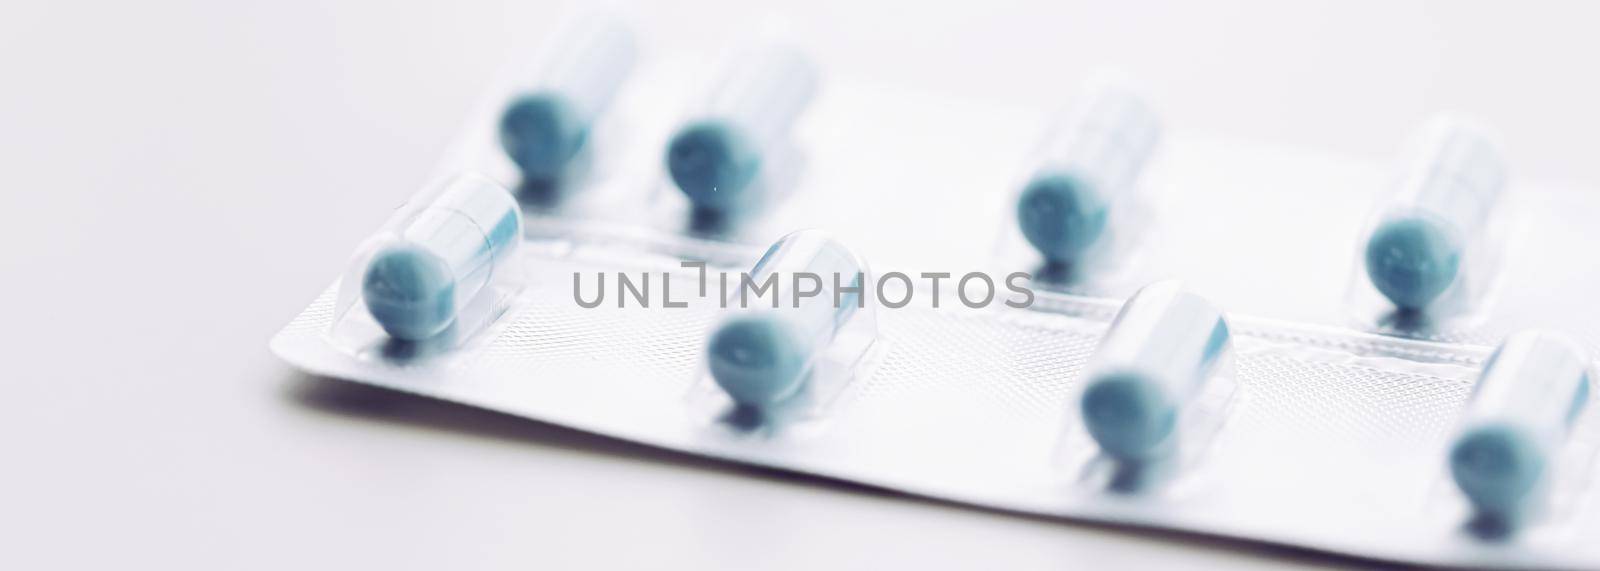 Blue pills and capsules as nutrition supplement, wellness and health care concept